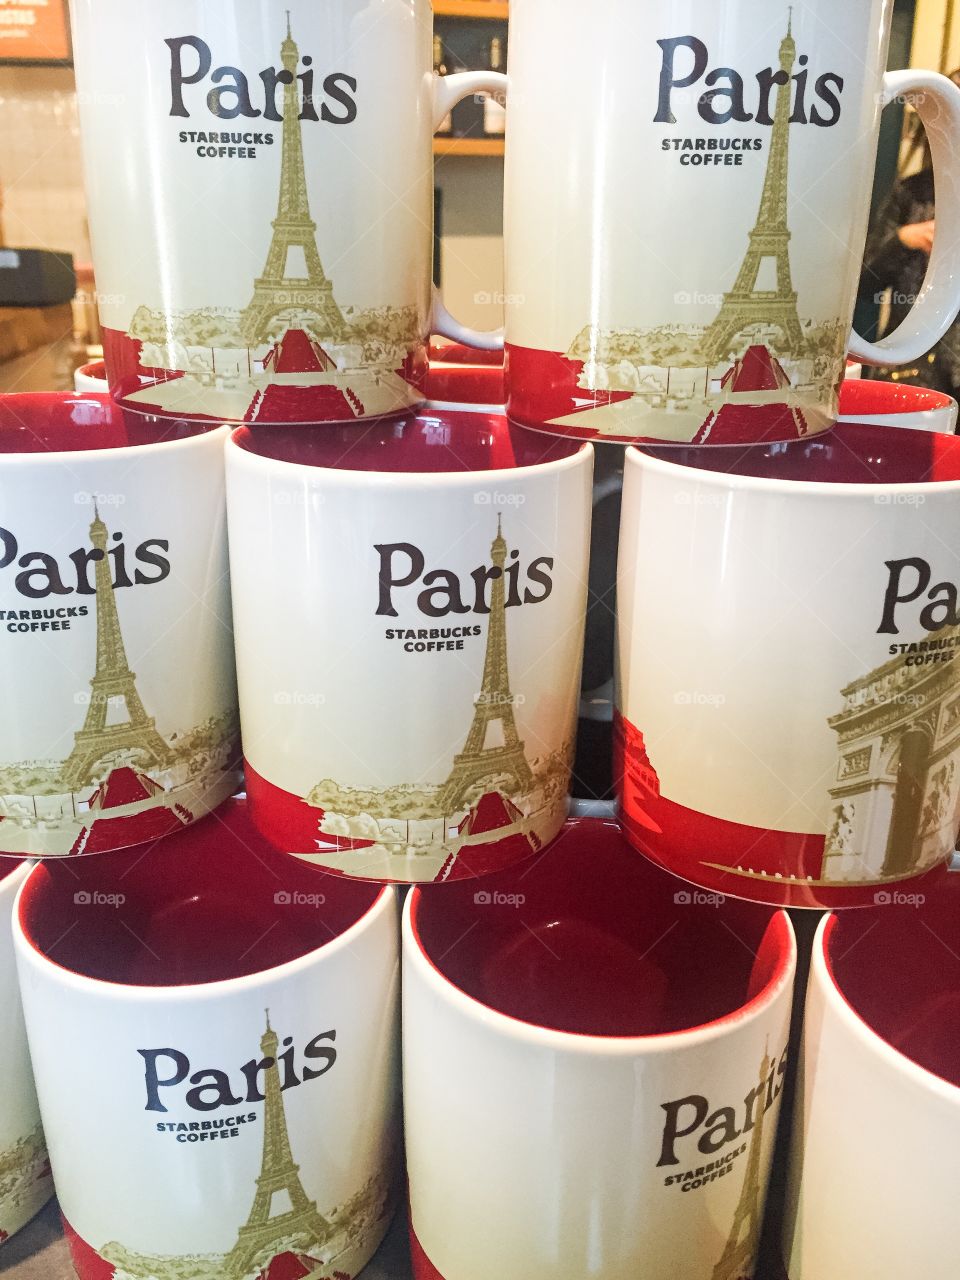 Souvenir shop in Paris that sells mugs with the Eiffel Tower on.